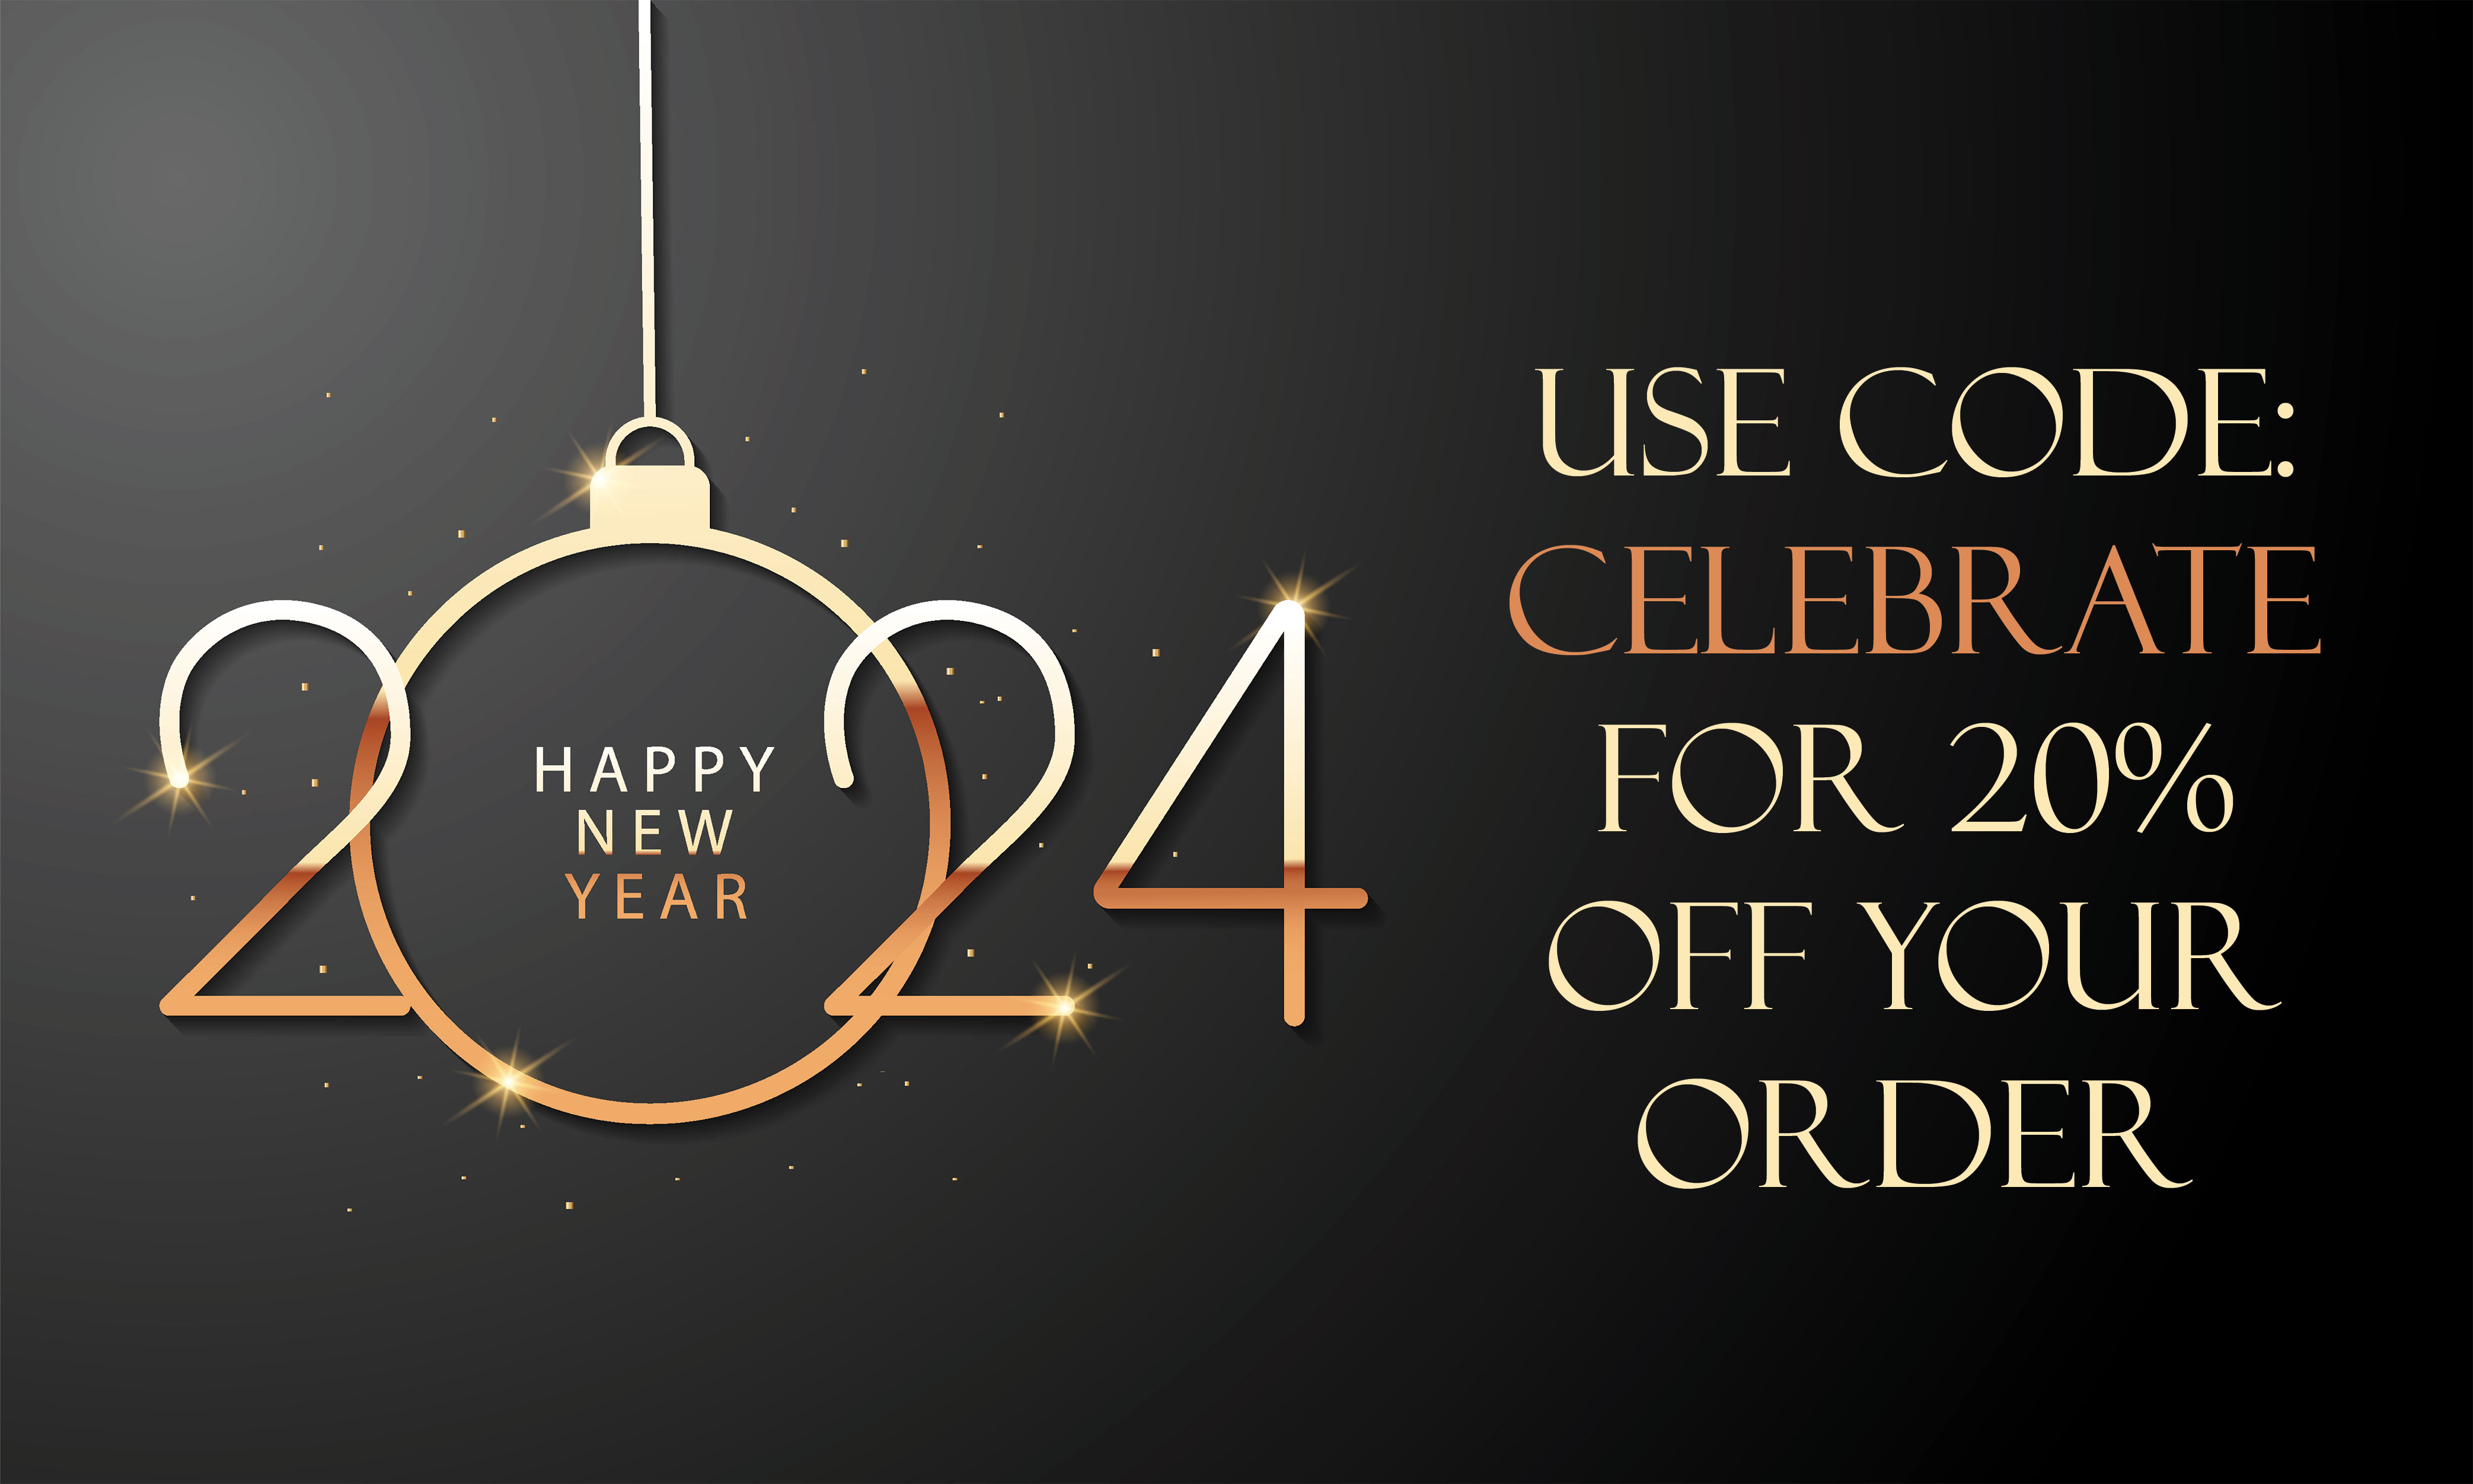 Happy 2024 New Year Use Code CELEBRATE for 20% off your order